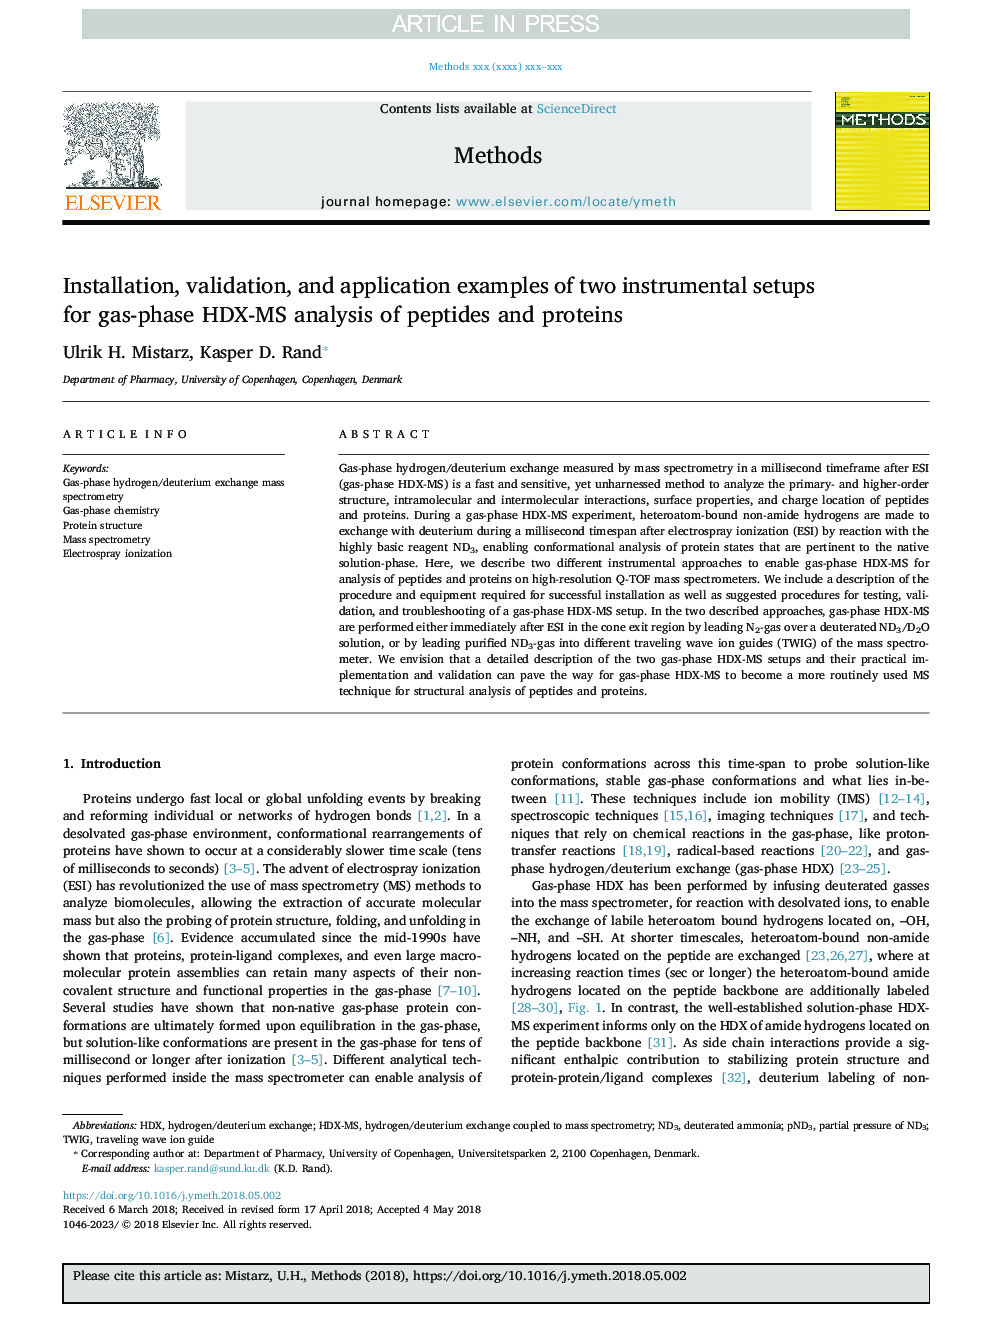 Installation, validation, and application examples of two instrumental setups for gas-phase HDX-MS analysis of peptides and proteins